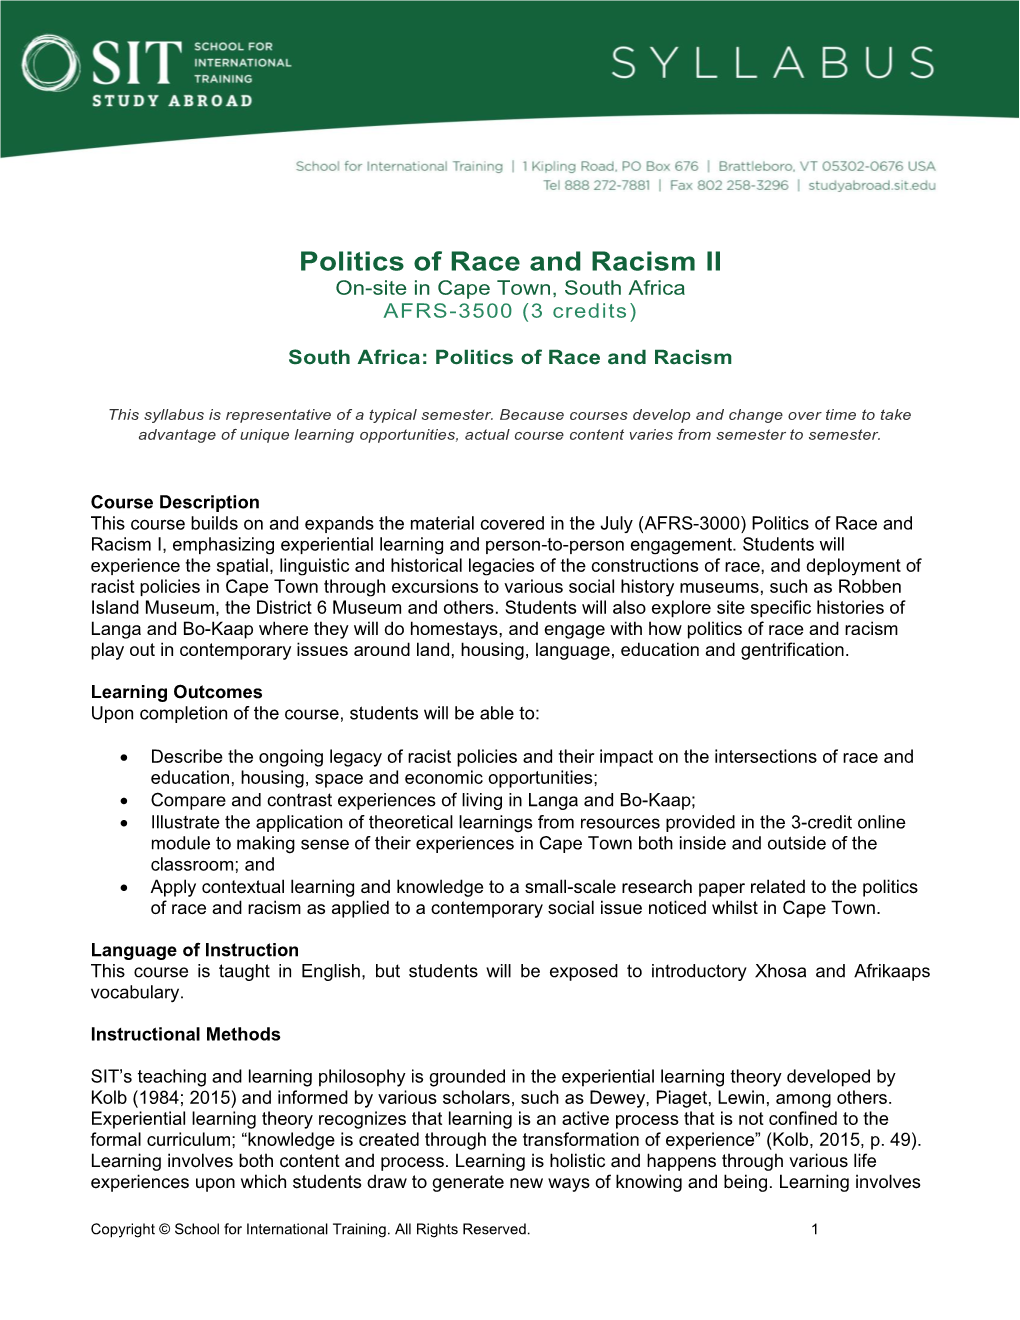 Politics of Race and Racism II On-Site in Cape Town, South Africa AFRS-3500 (3 Credits)